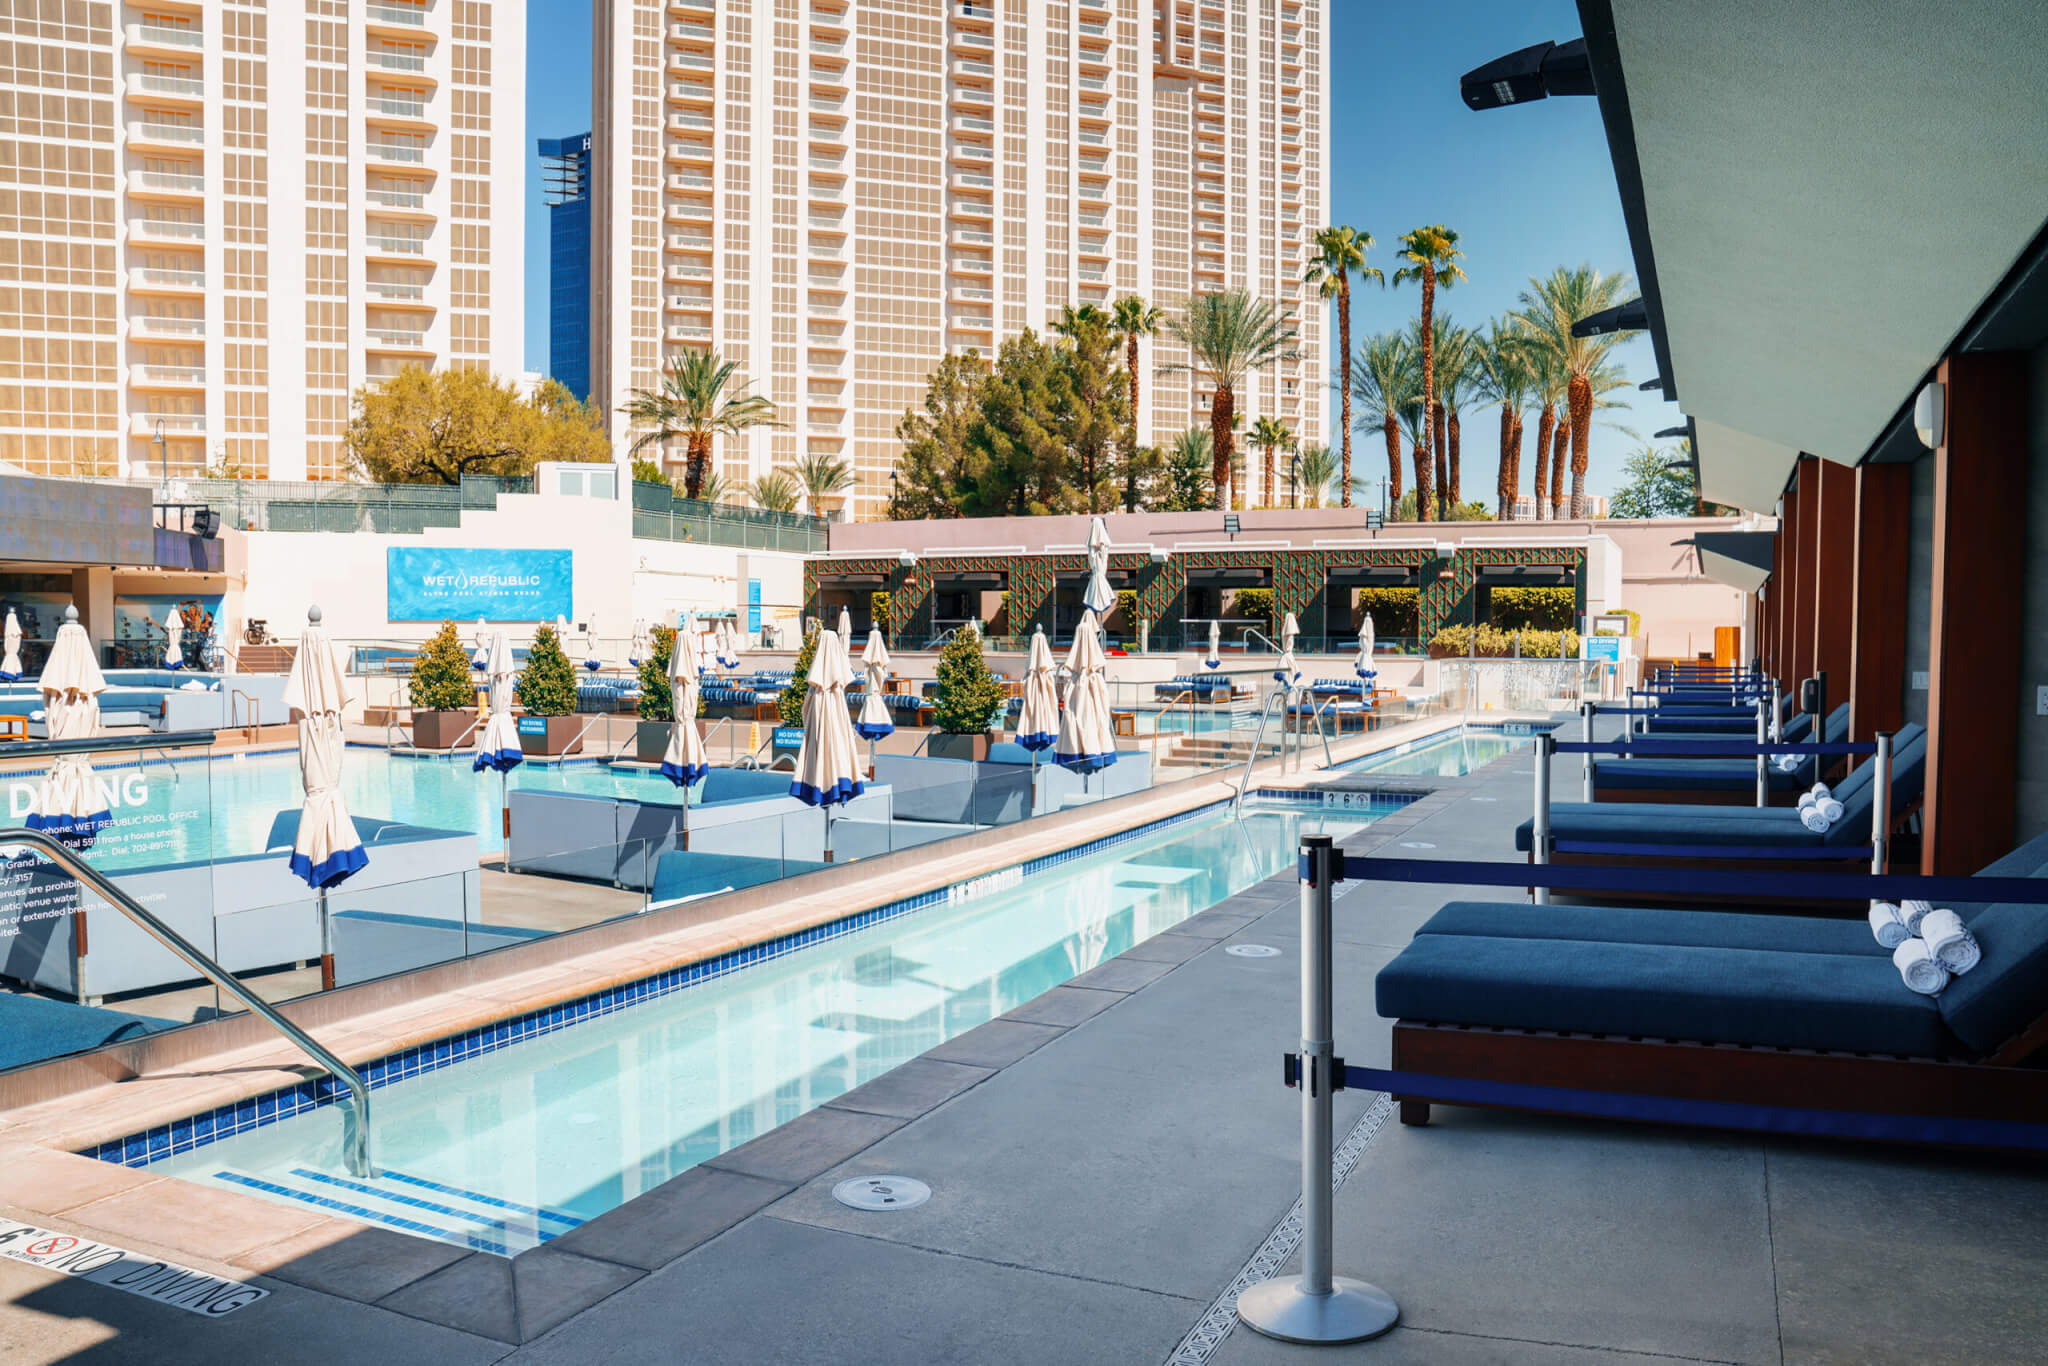 Deluxe Cabanas & Deck Tables at Wet Republic